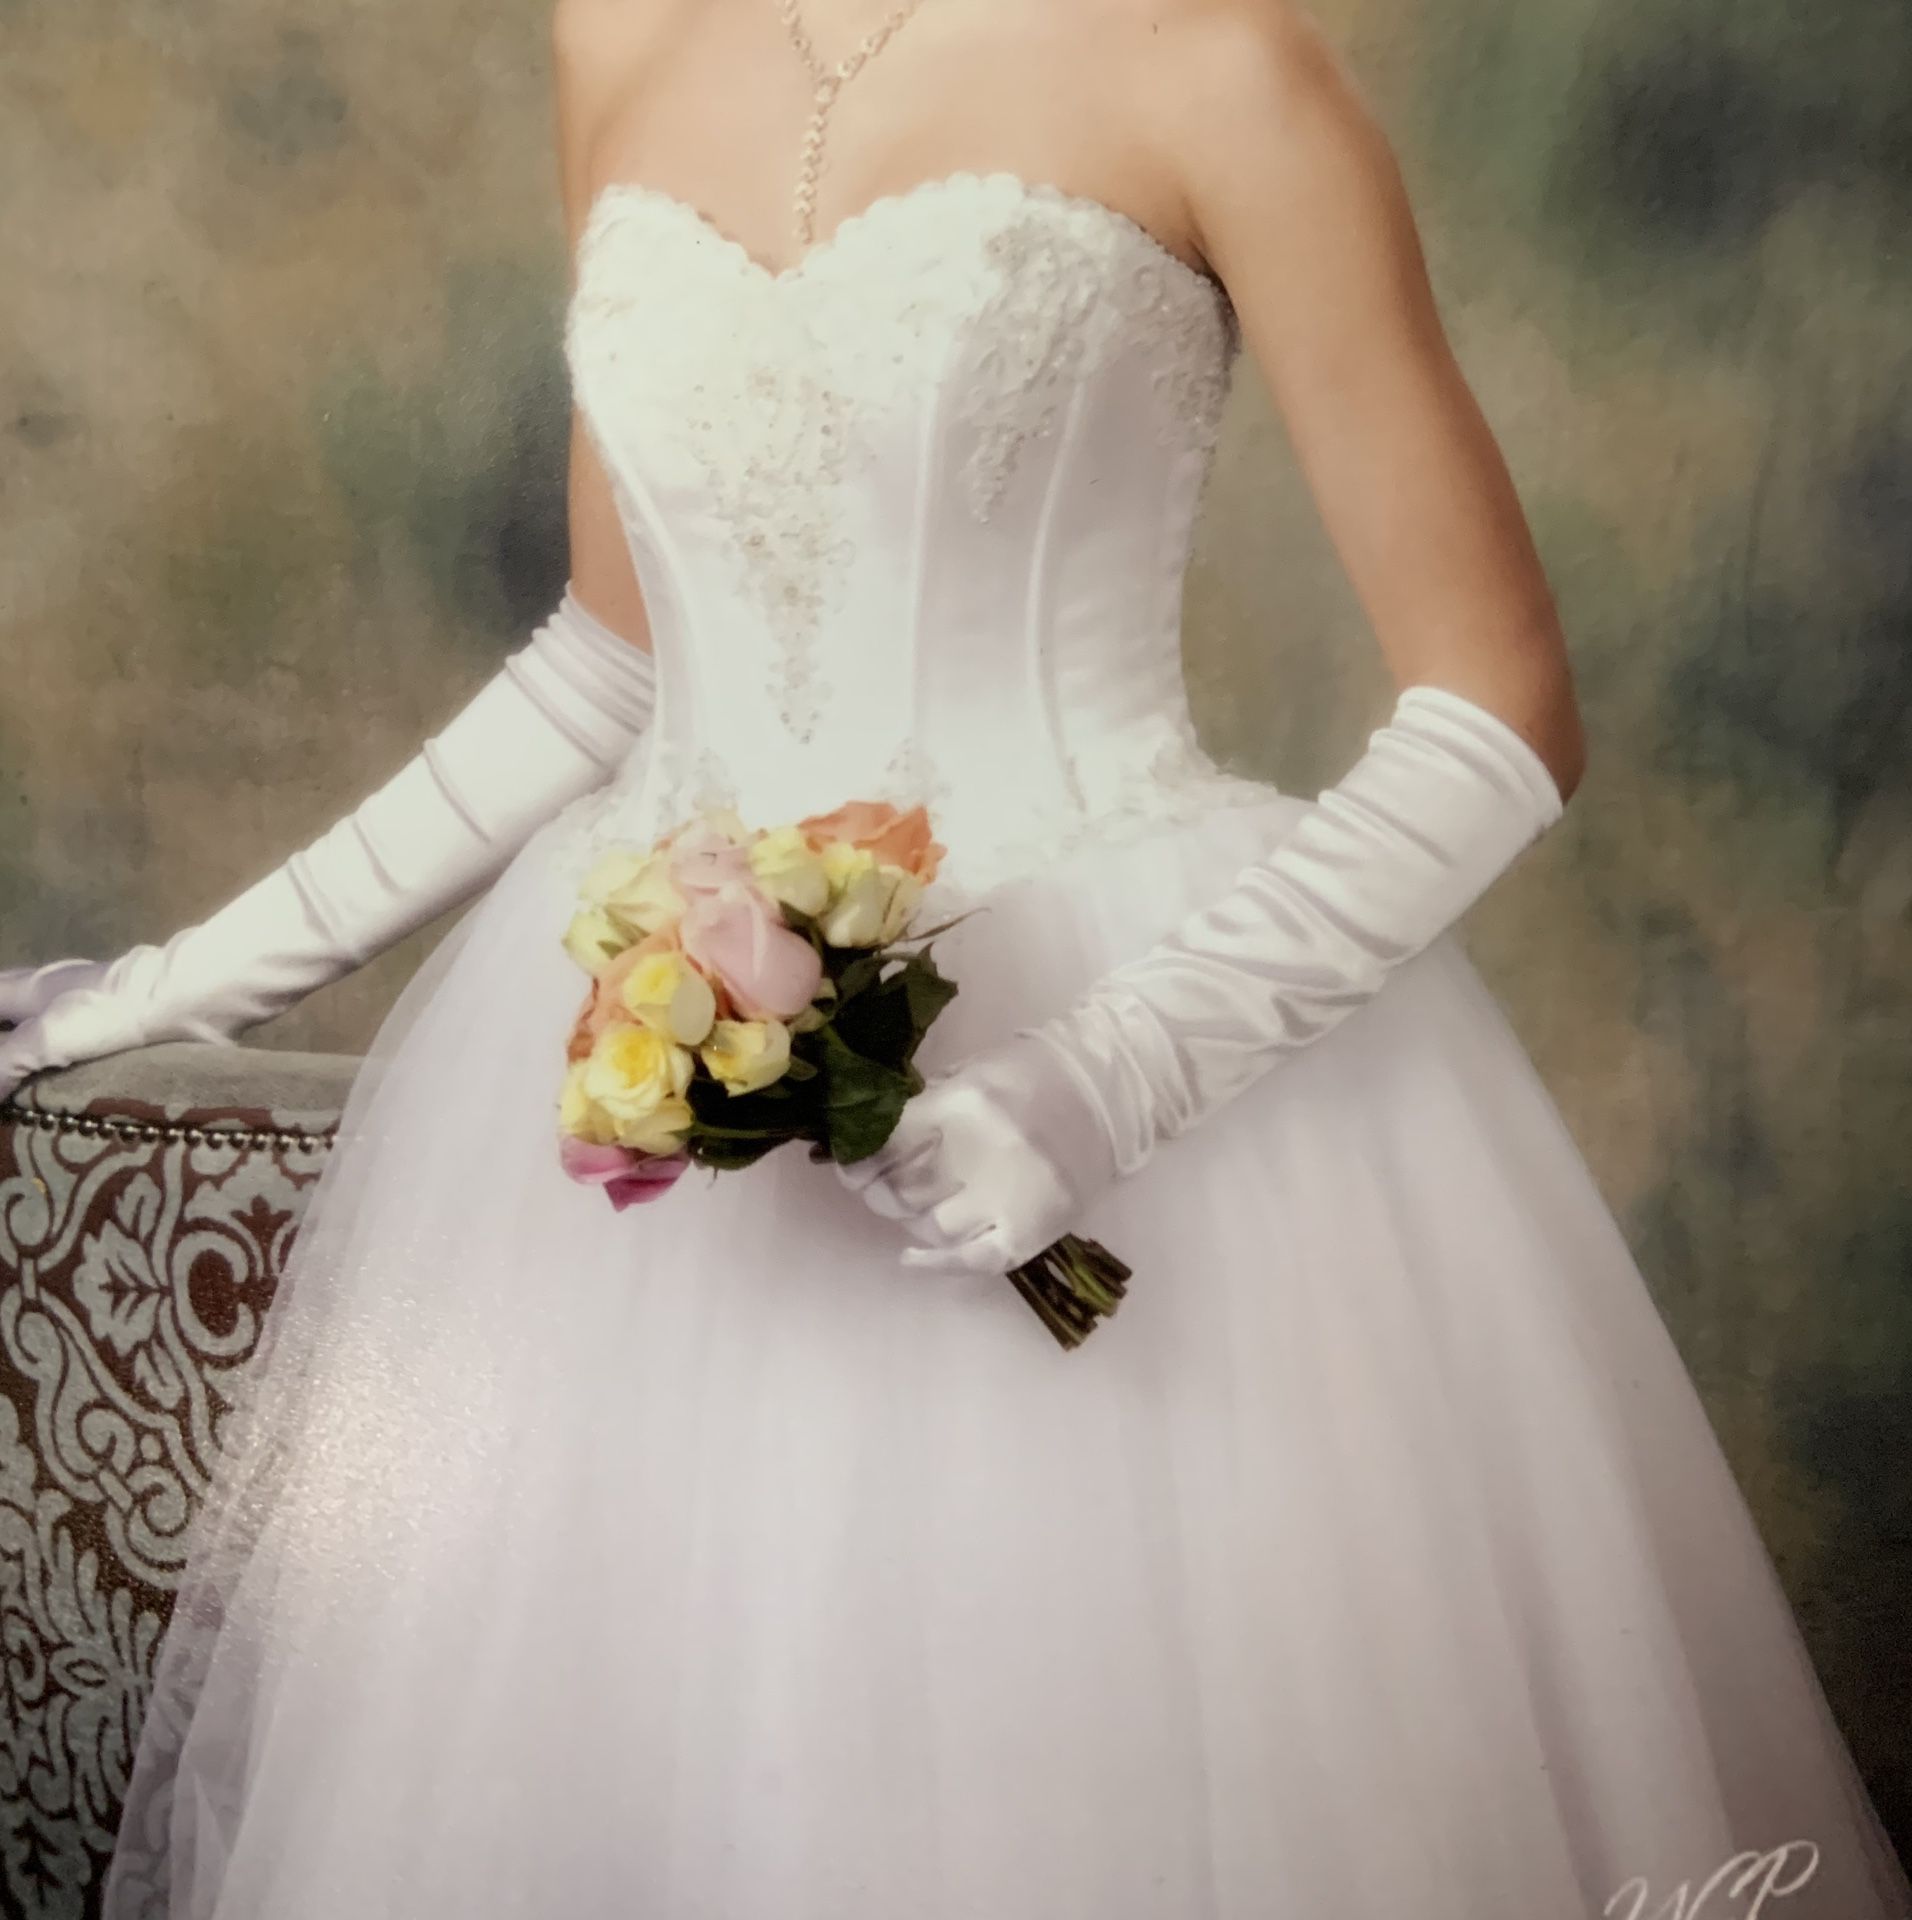 Wedding ball gown size 0-2. Perfect for sweet 16, Quinceanera or debutante ball.